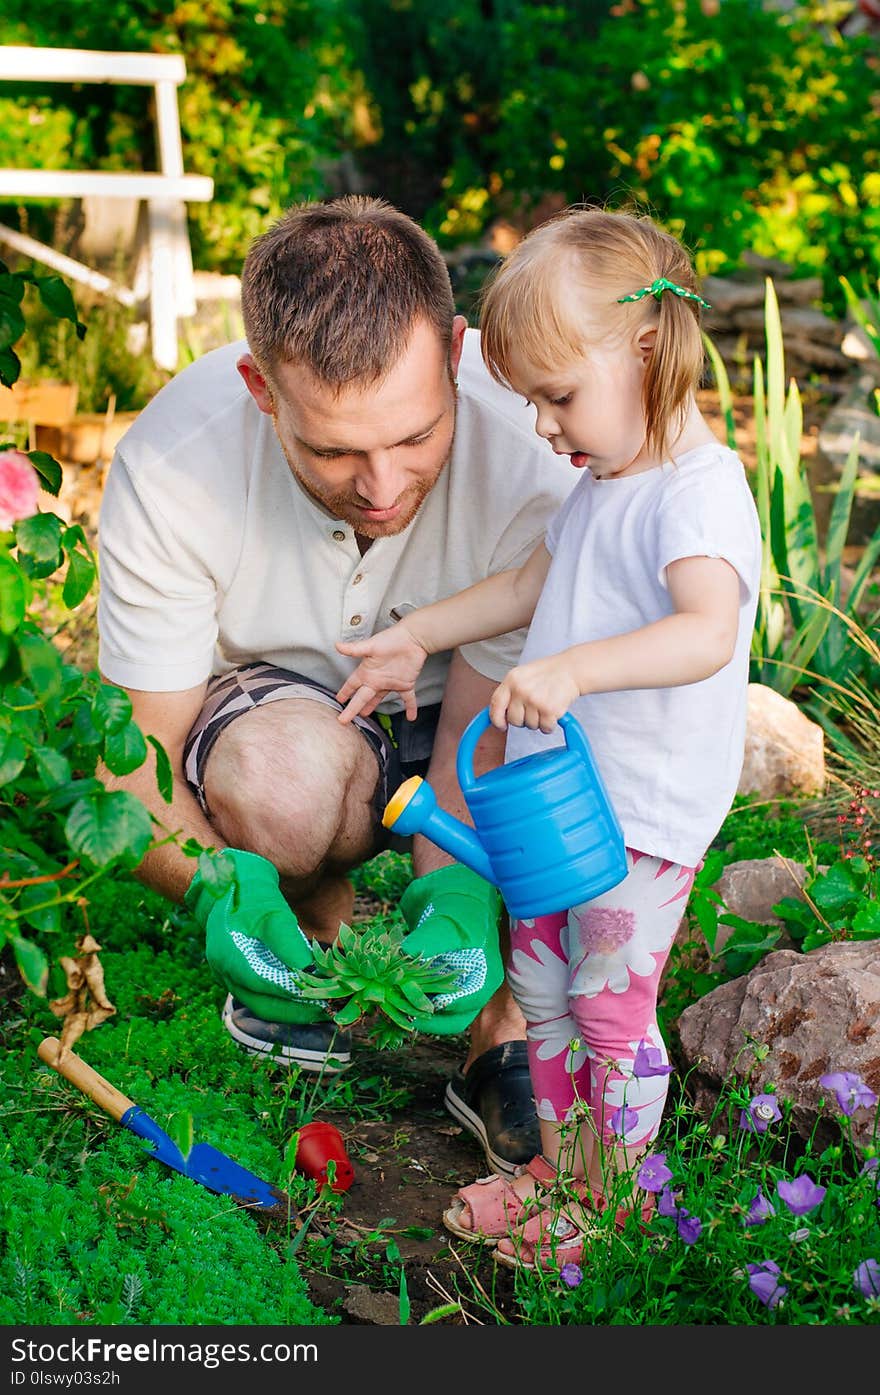 Family outdoor activity concept. Little girl with her father watering succulent planting in the garden. Family outdoor activity concept. Little girl with her father watering succulent planting in the garden.